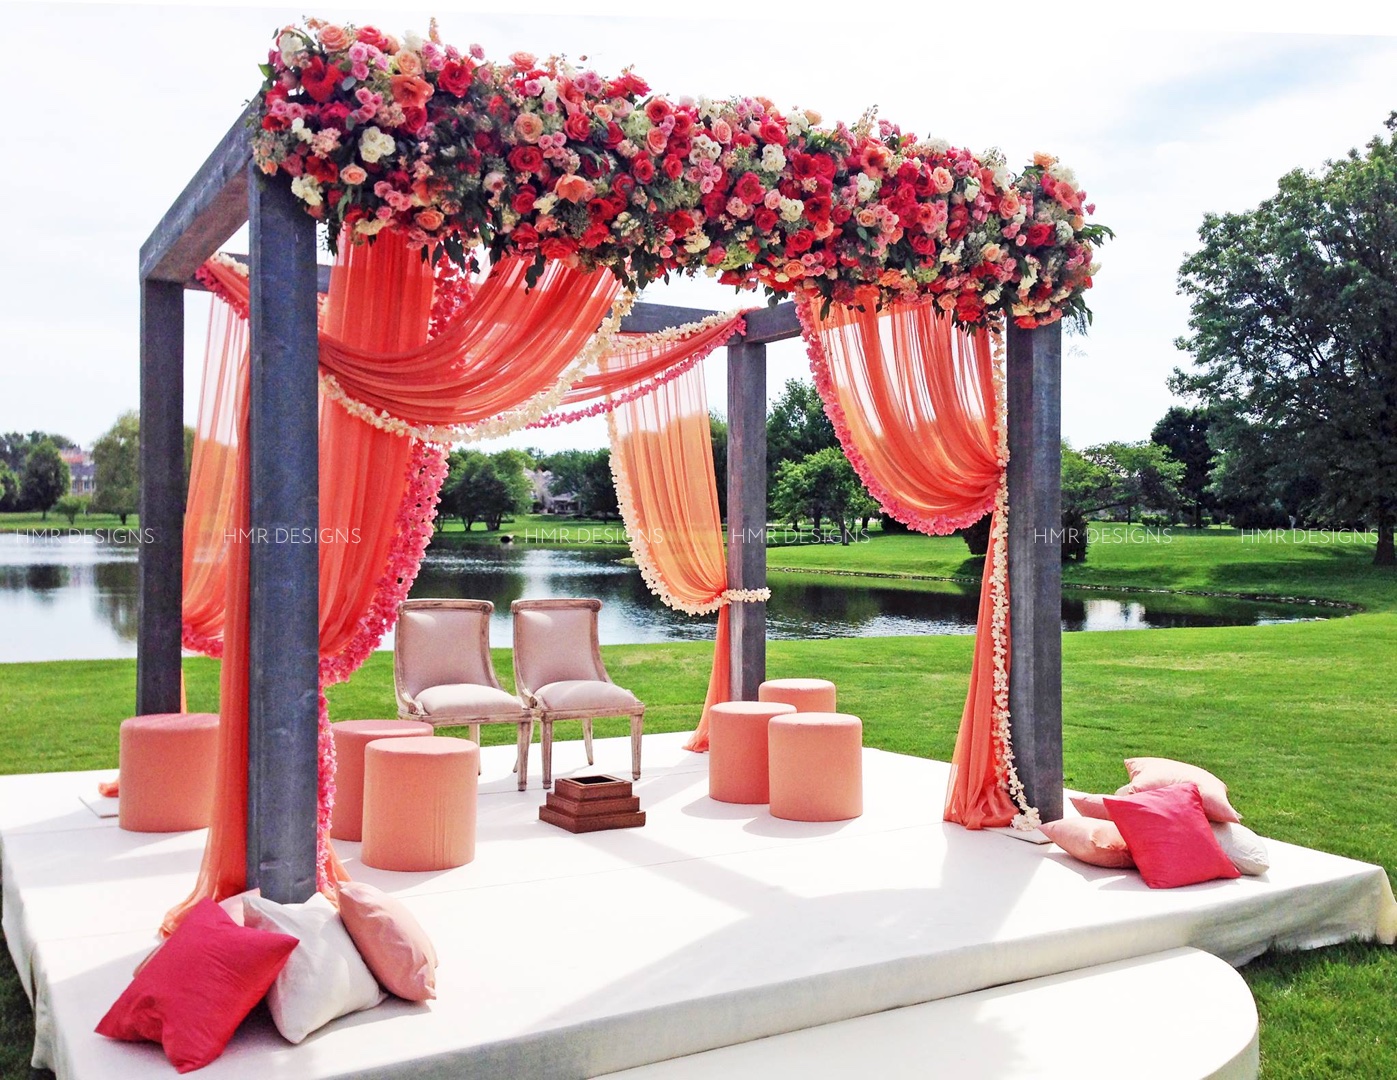 A steel framed canopy or mandap is draped with peach, pink and coral fabric and flowers for an outdoor Indian wedding by HMR Designs